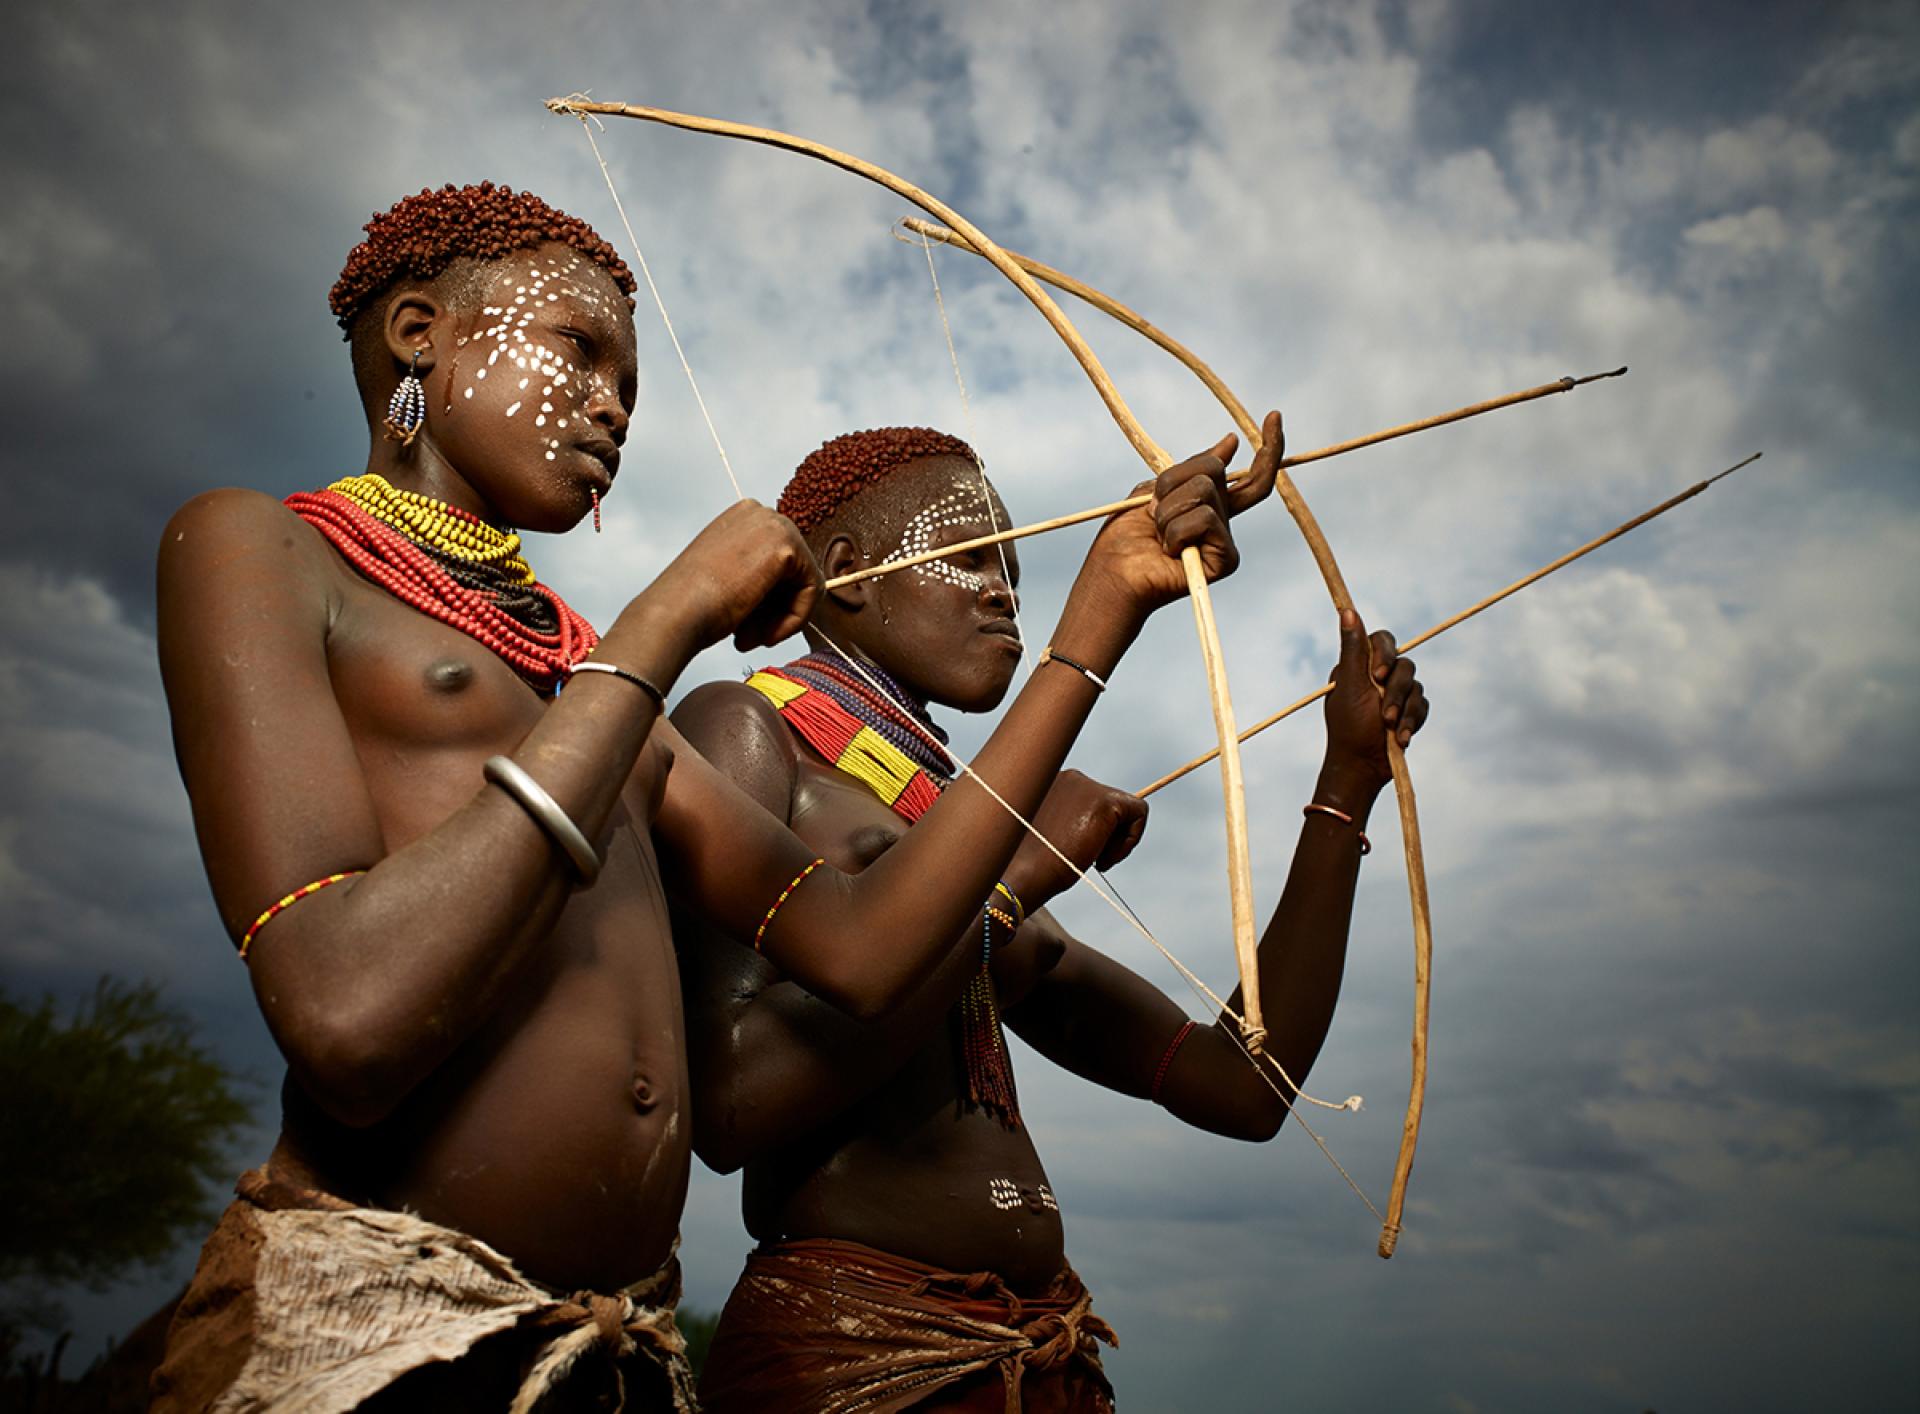 London Photography Awards Winner - The Bow and Arrow Girls